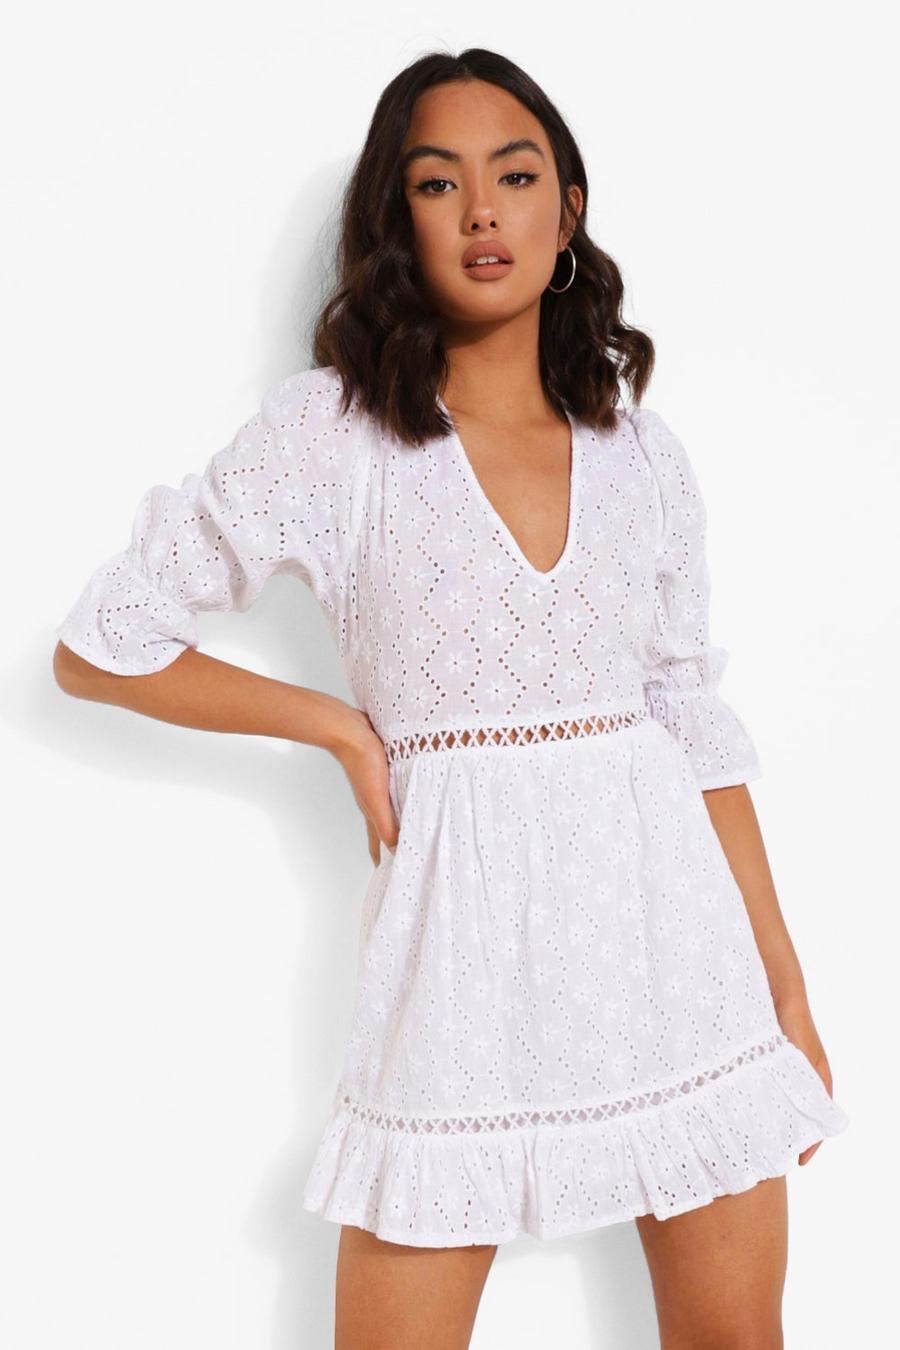 Robe courte style broderie à lacets et manches bouffantes, White